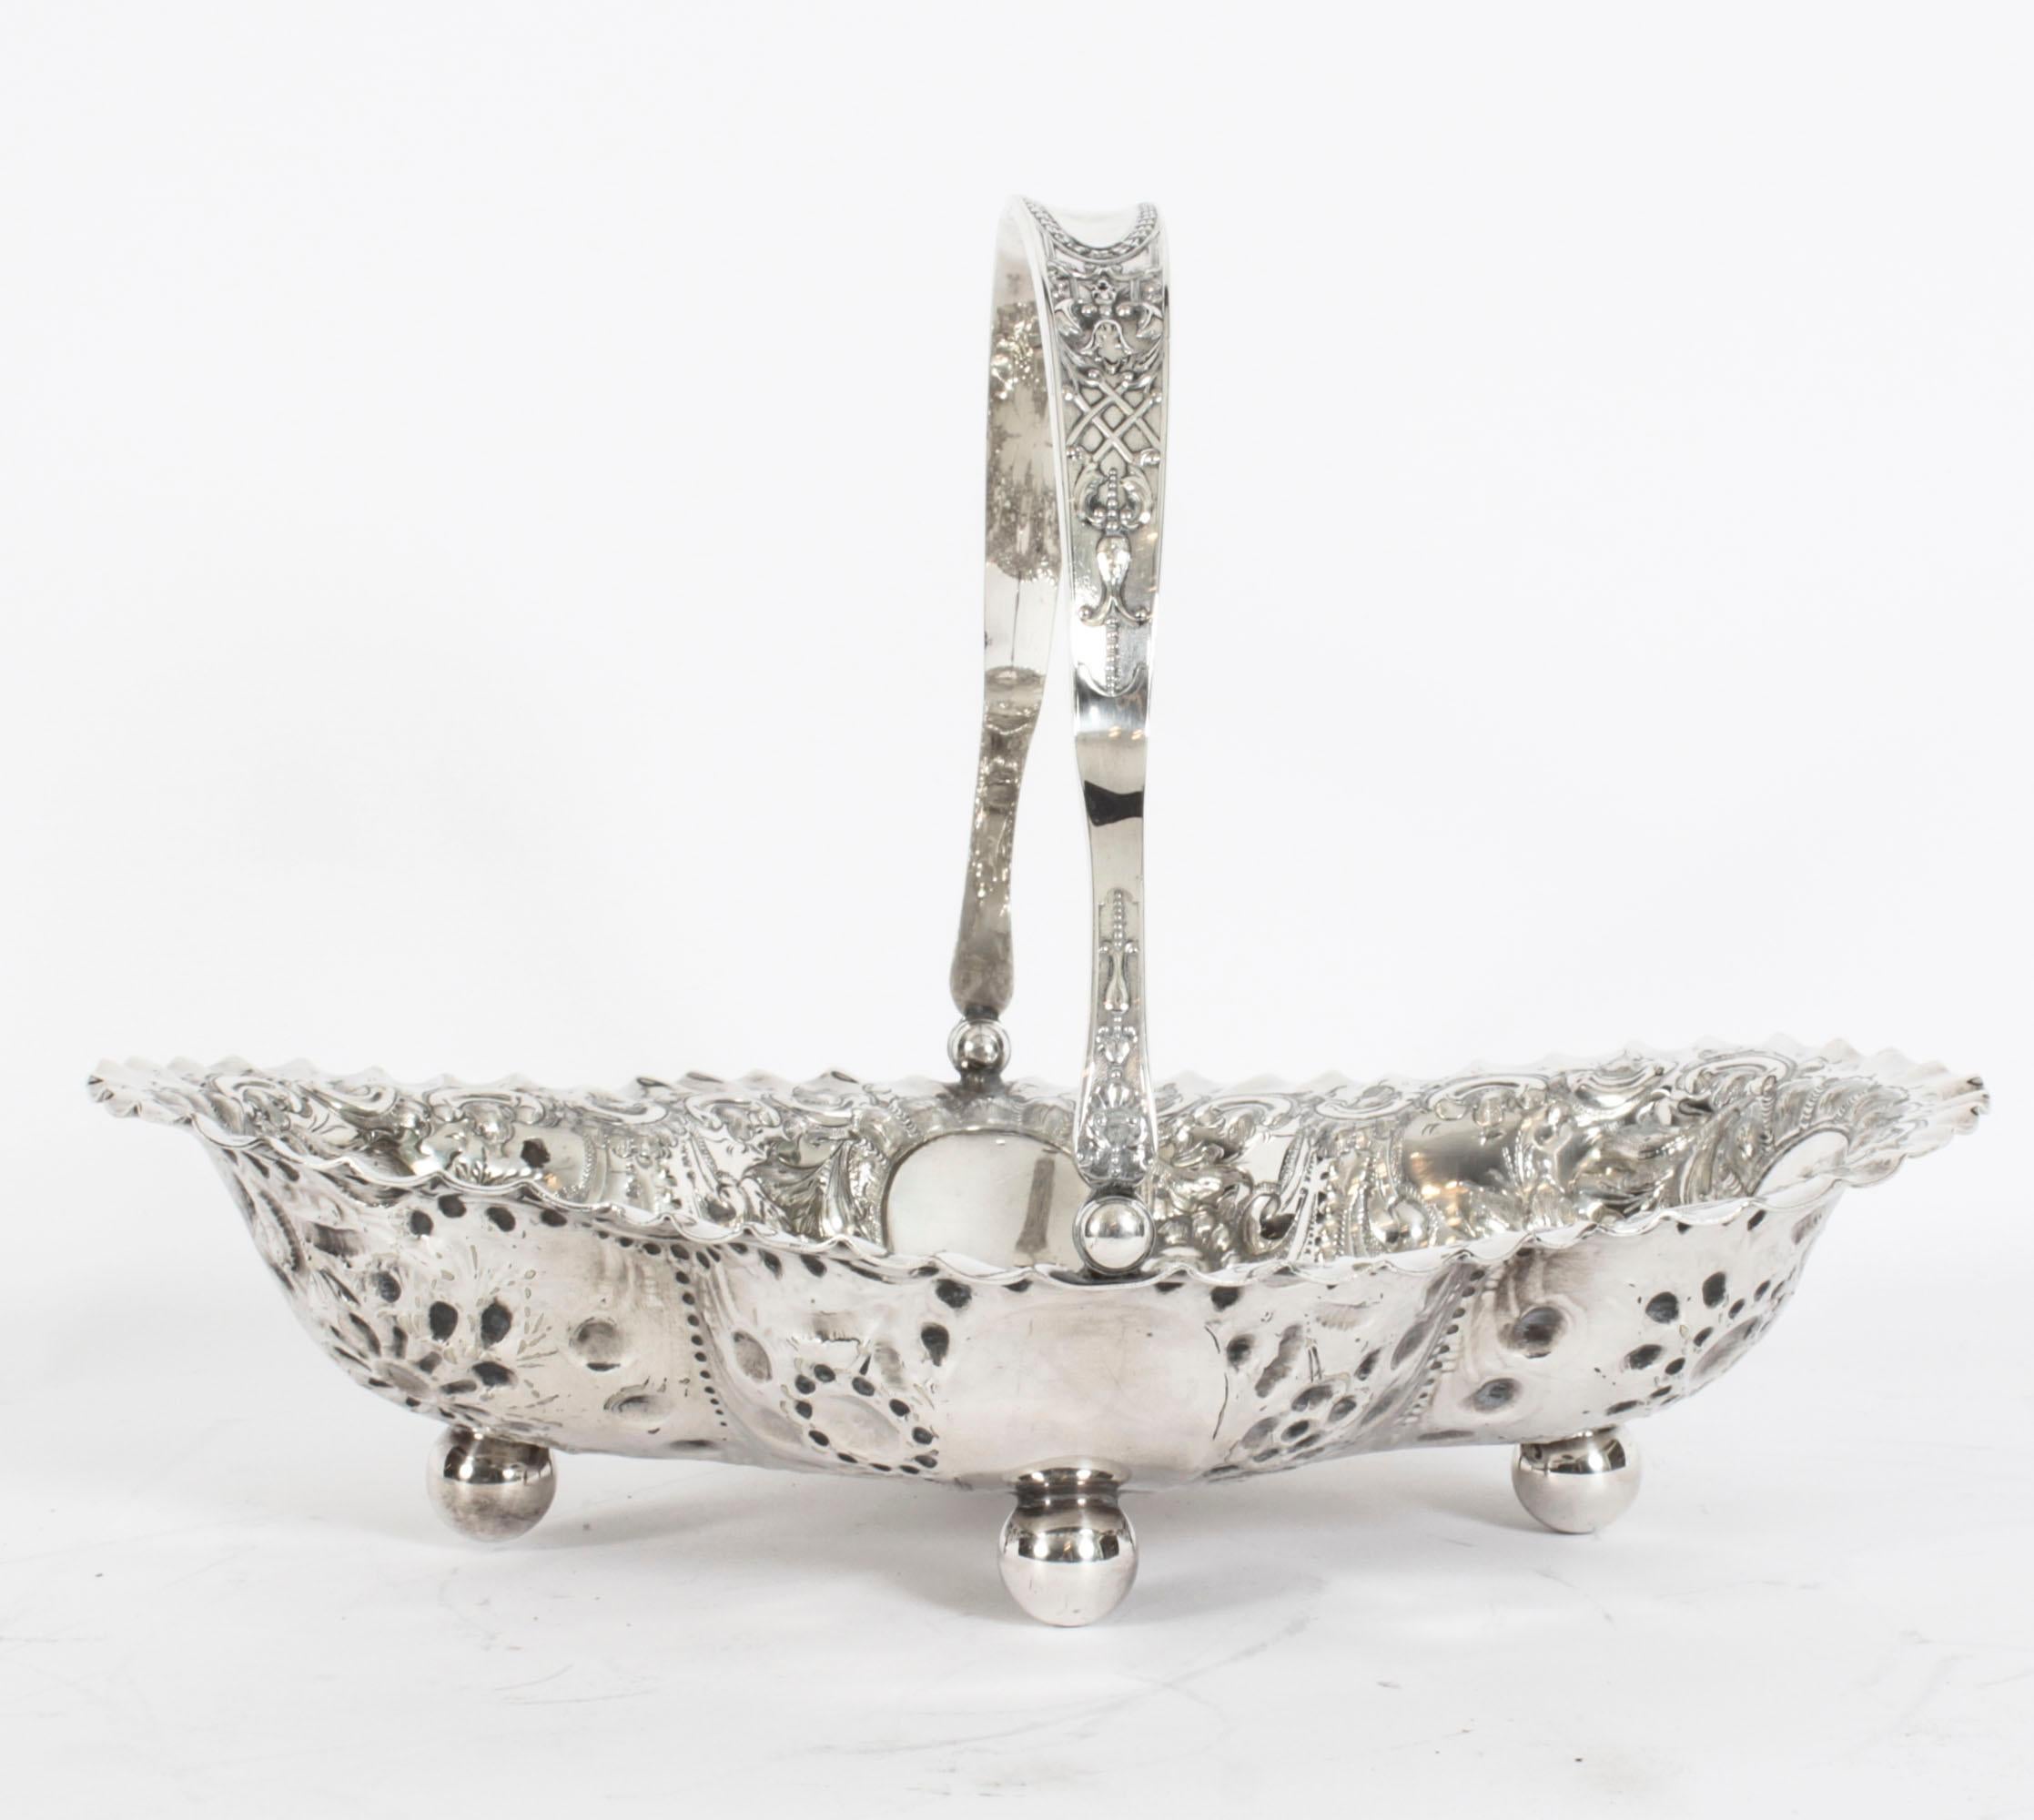 This is an exceptionally fine antique English Victorian silver plated fruit basket with hallmarks for the celebrated silversmith, James Dixon, circa 1880 in date.
 
This magnificent basket has a shaped swing handle on a flared shaped oval basket